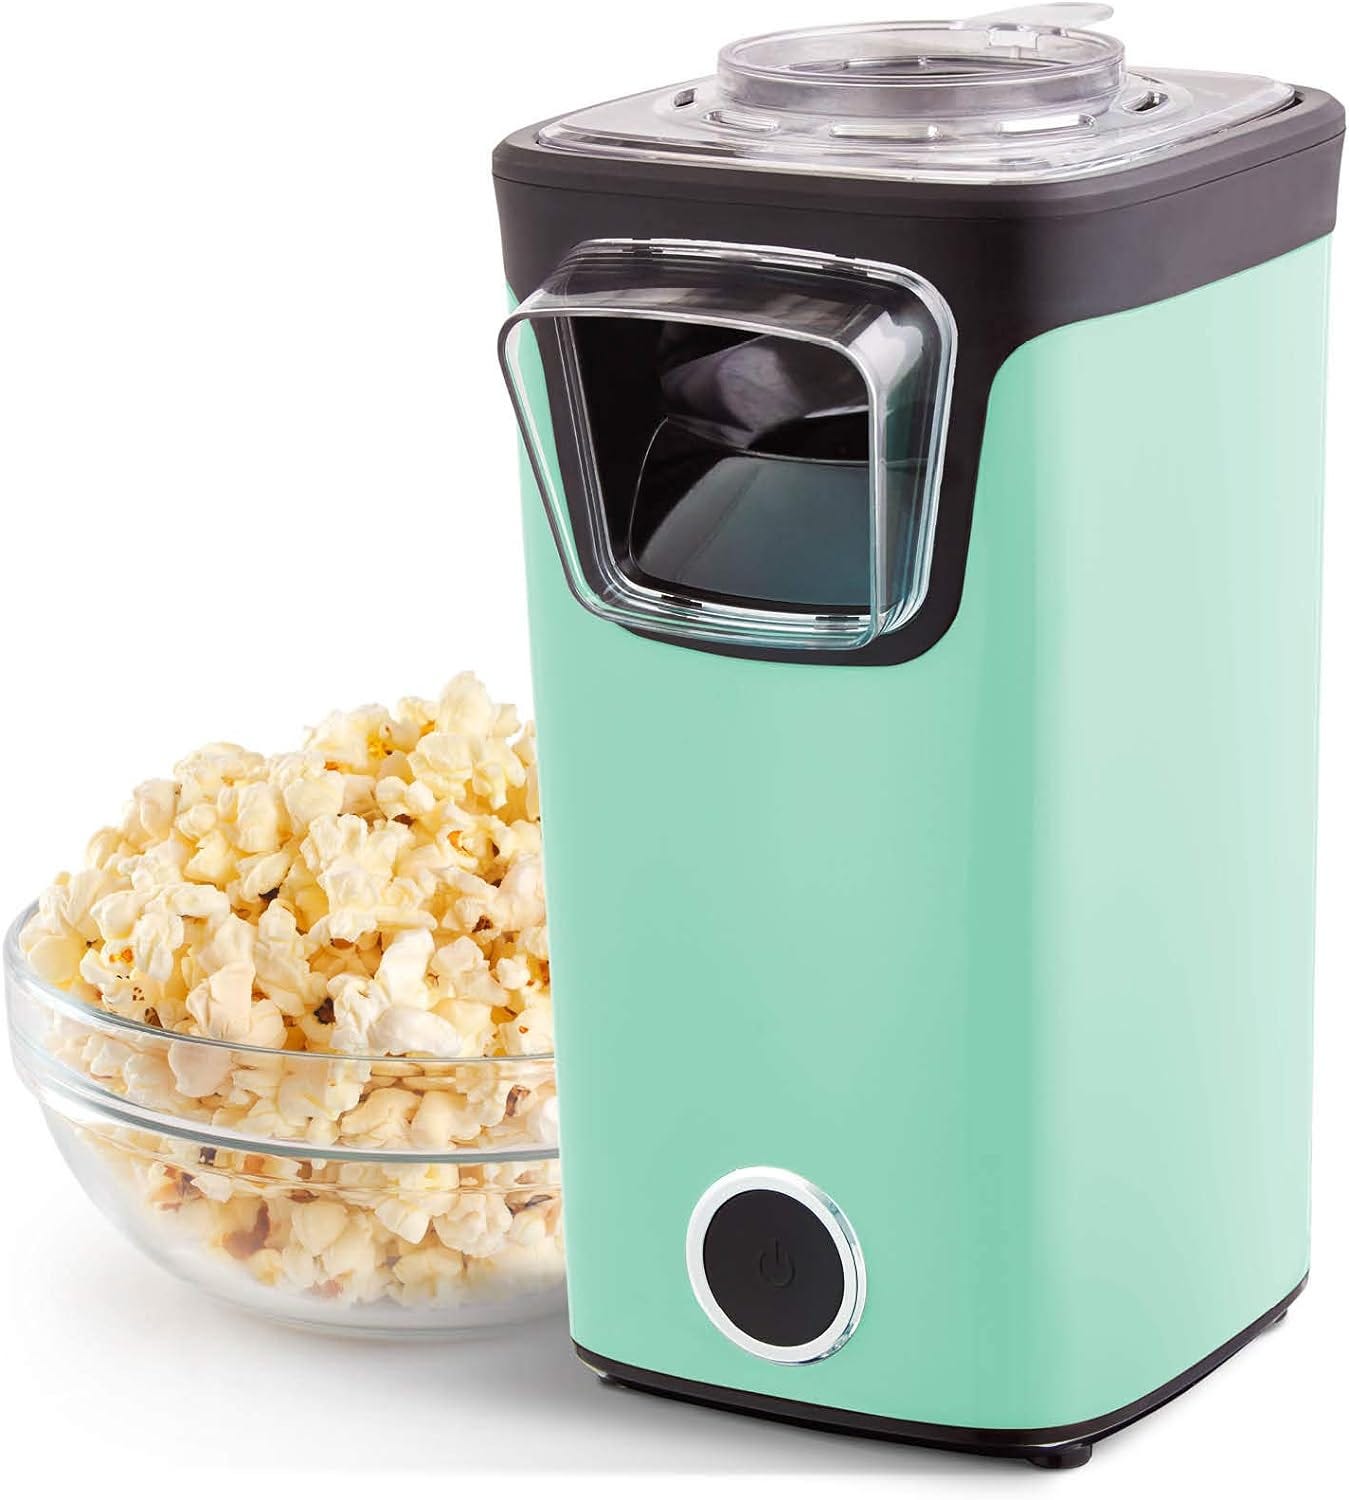 DASH Turbo POP Popcorn Maker with Measuring Cup to Portion Popping